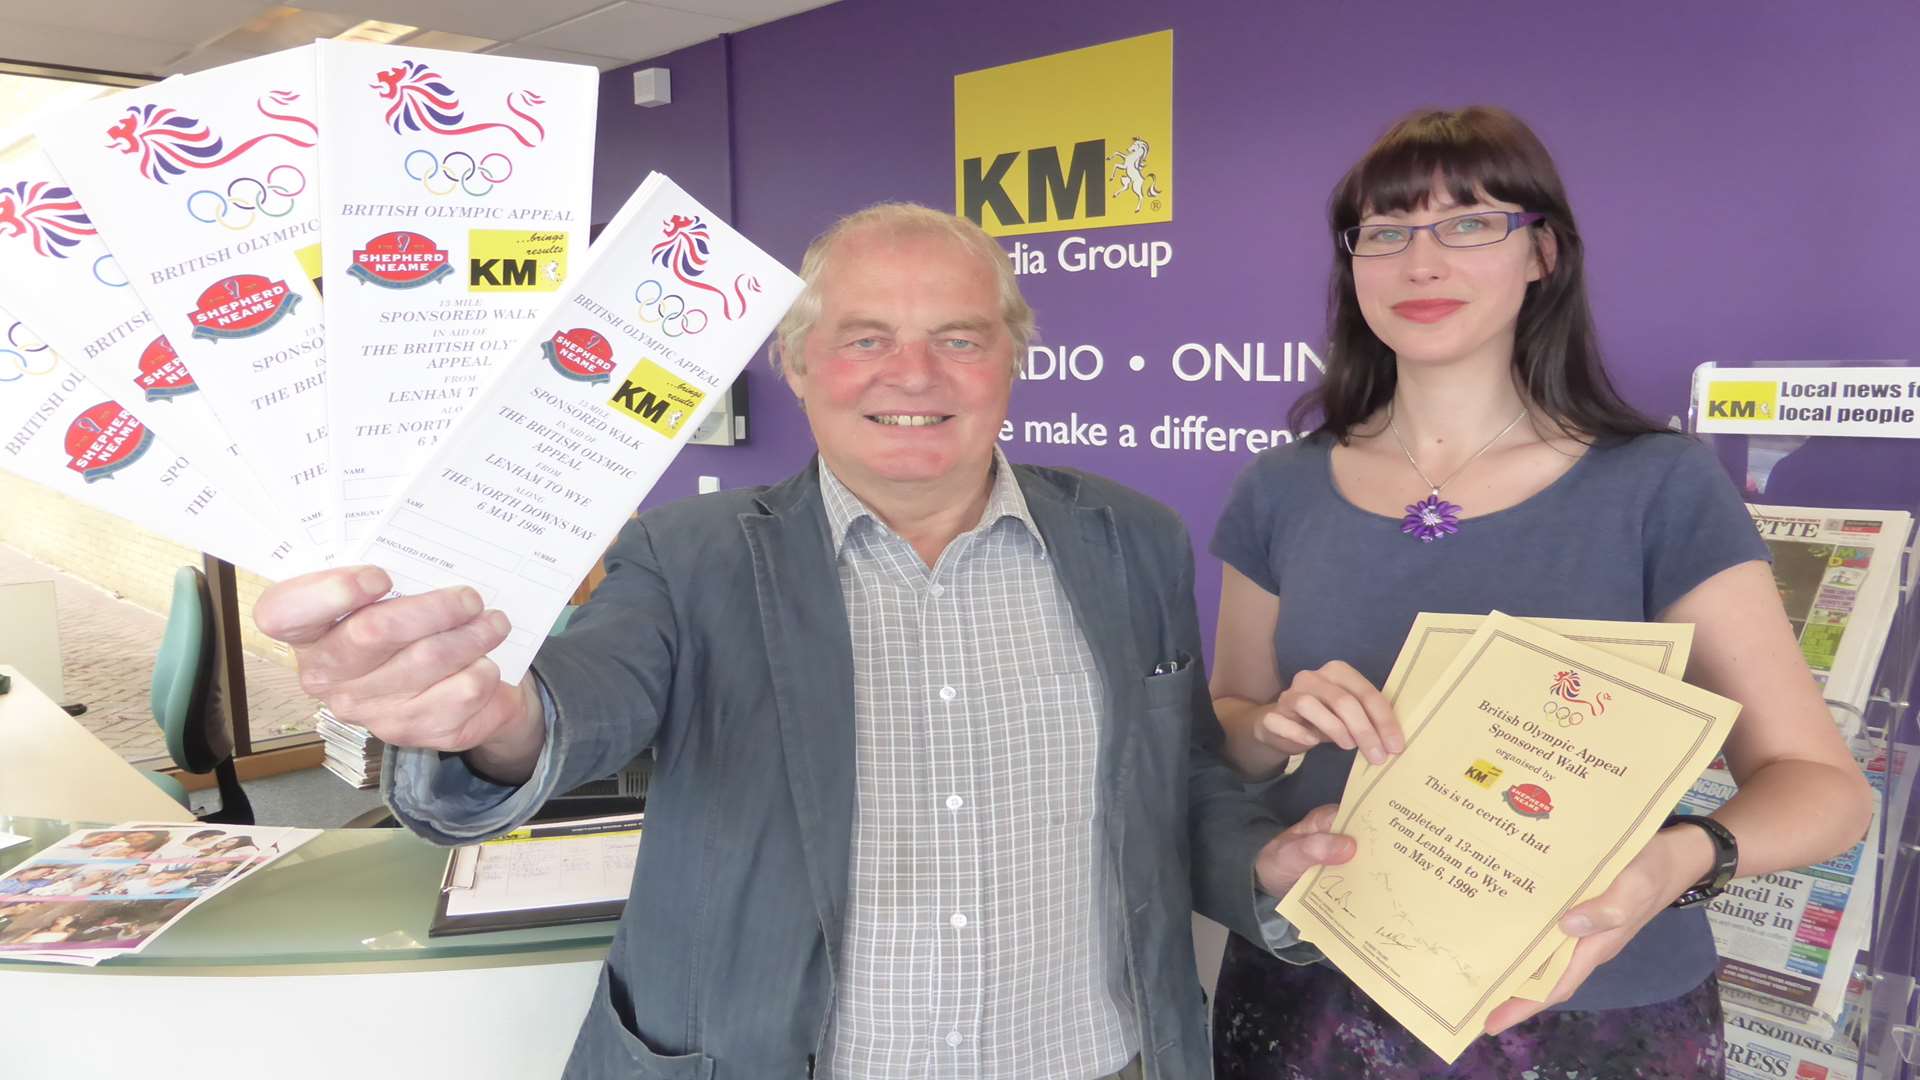 Peter Andrews, organiser of the first KM Charity Walk 20 years ago, visits the KM offices with flyers and certificates from the original event.